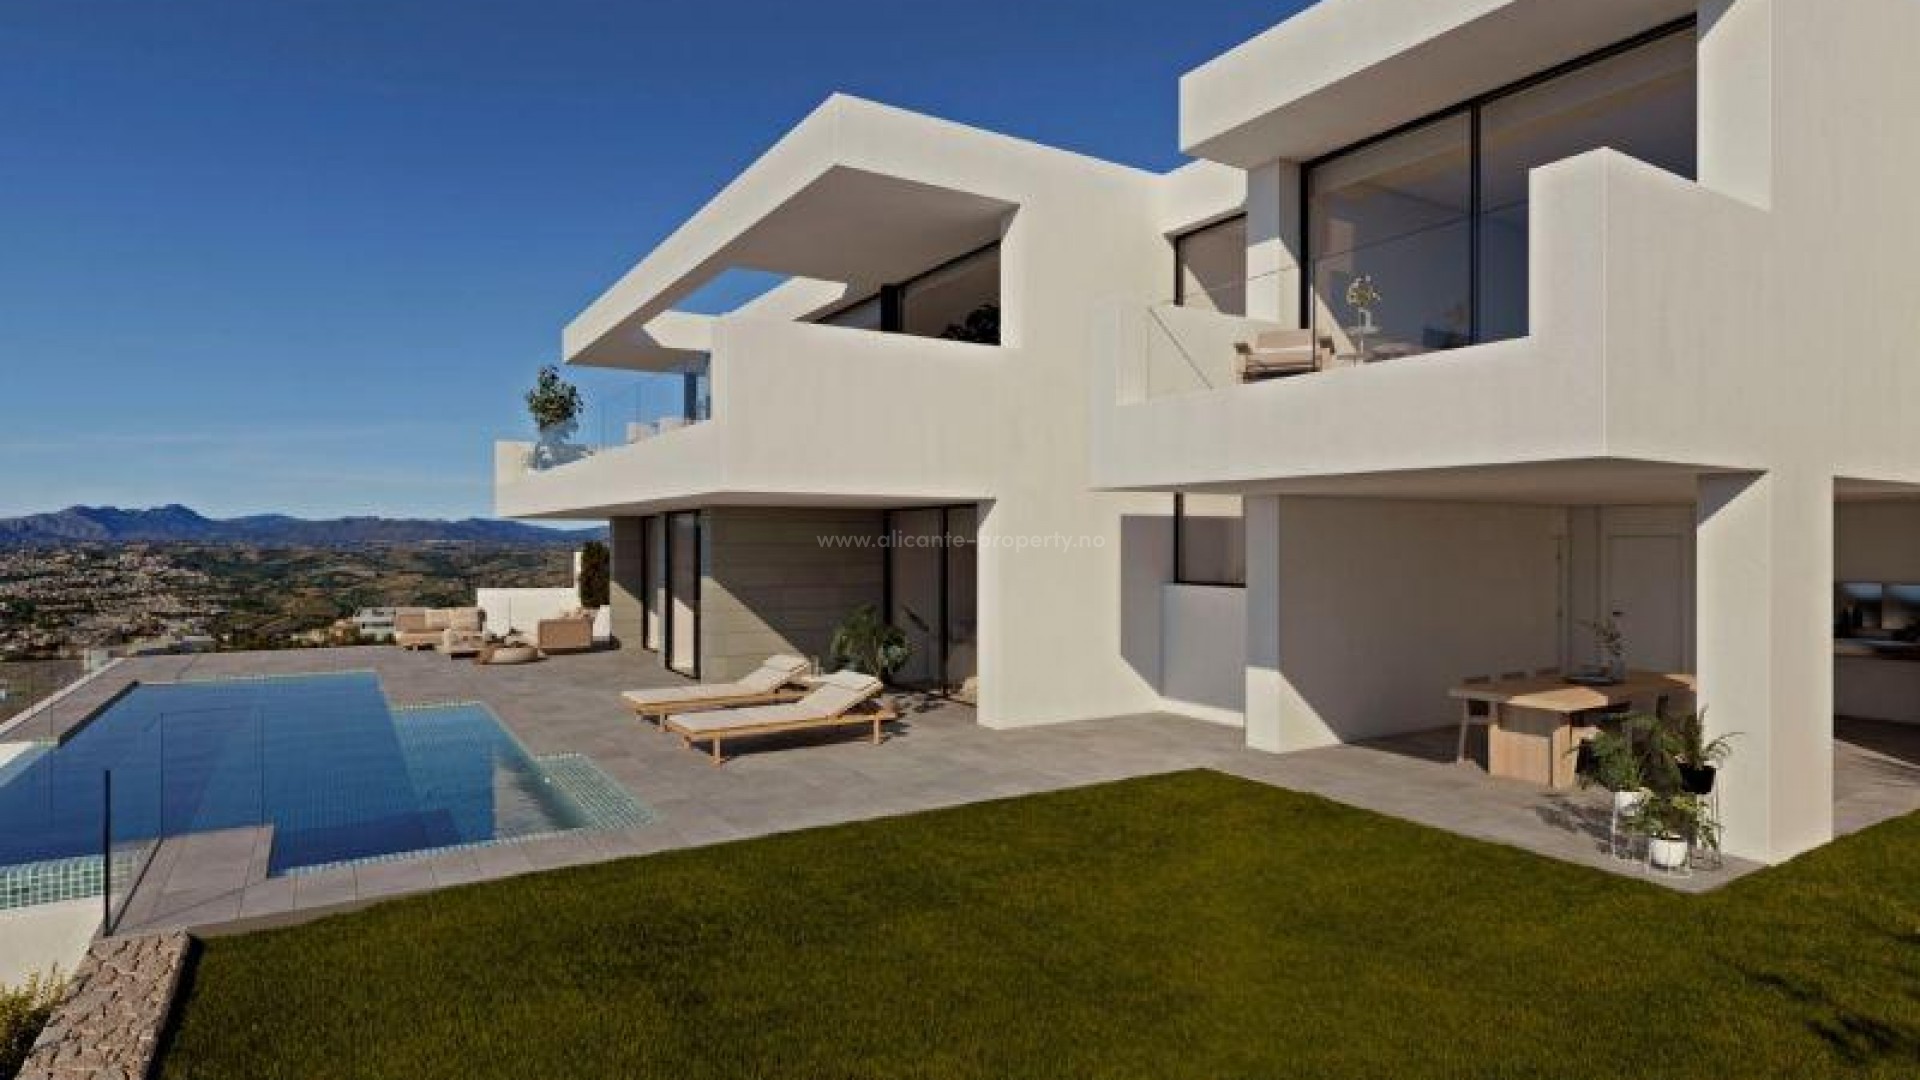 Exclusive house/villa in Benitachell with sea views, 3 bedrooms, infinity pool and large garden, closed garage for 2 cars, smart house